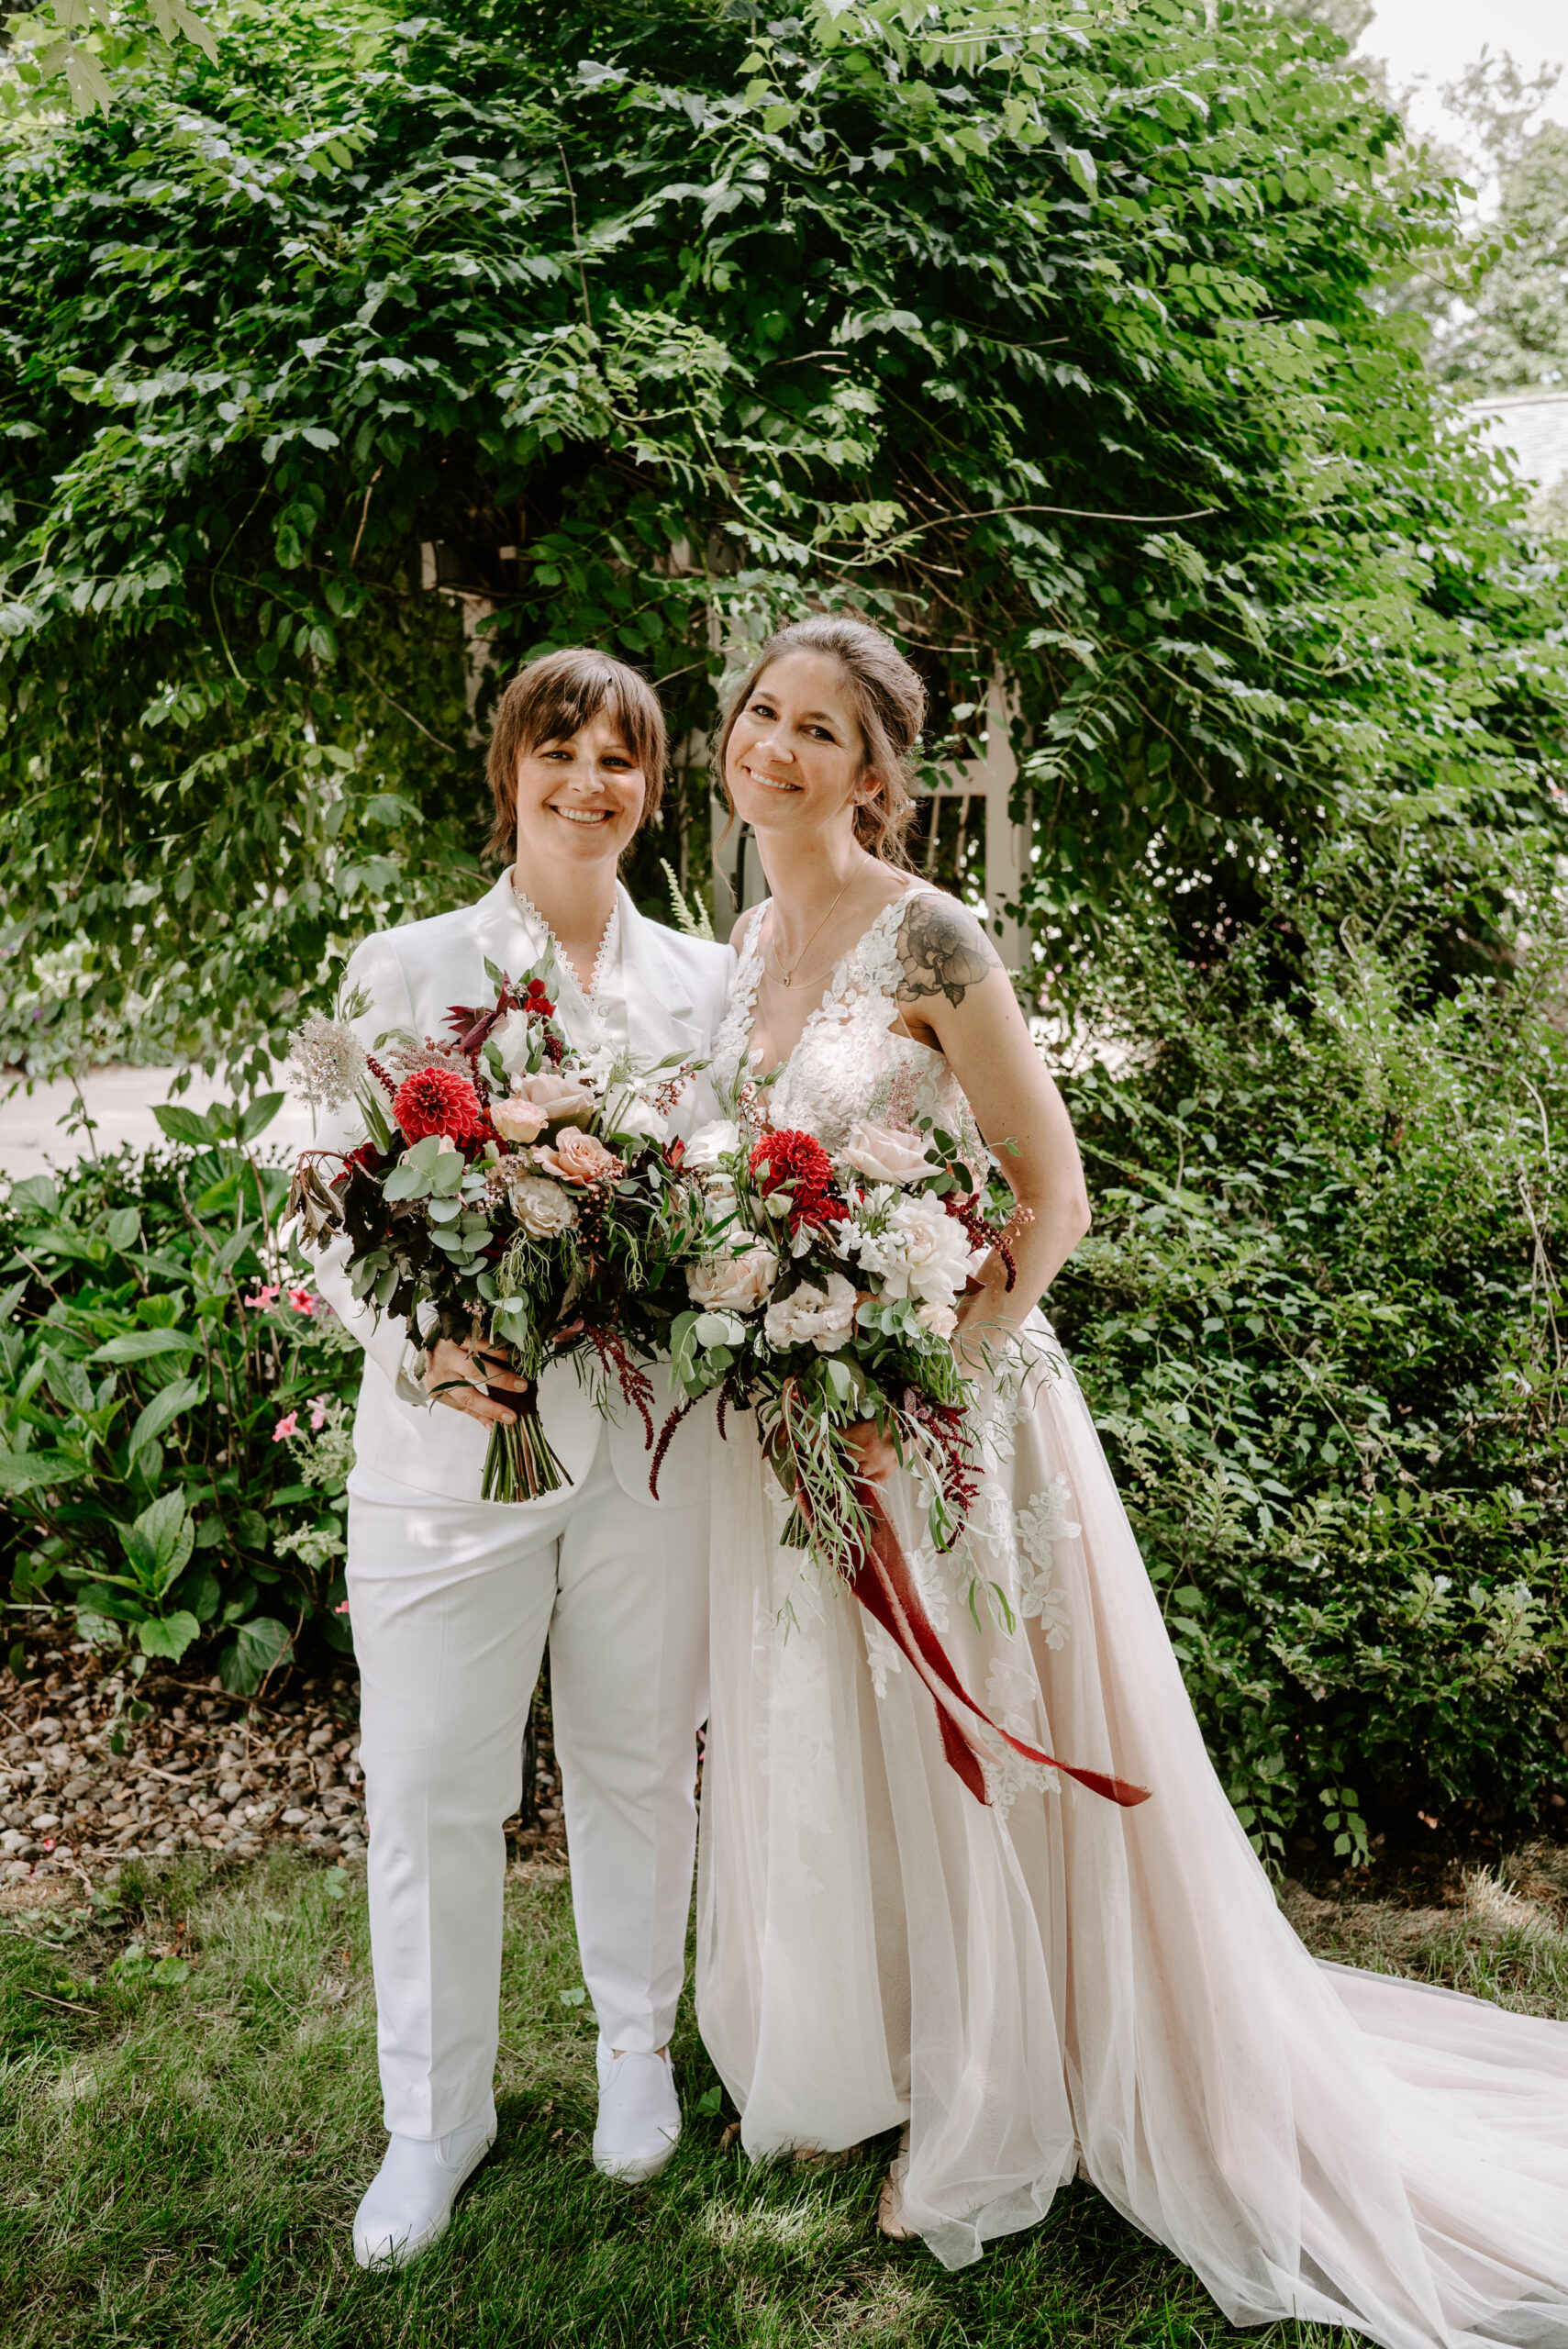 Two brides looking at the camera both in white both holding red and white and pink bouquets LGBTQ backyard wedding summer wedding in Michigan backyard Michigan wedding Lawton Michigan wedding photography by Liv Lyszyk photography who is an LGBTQ plus wedding photographer based in Grand Rapids Michigan